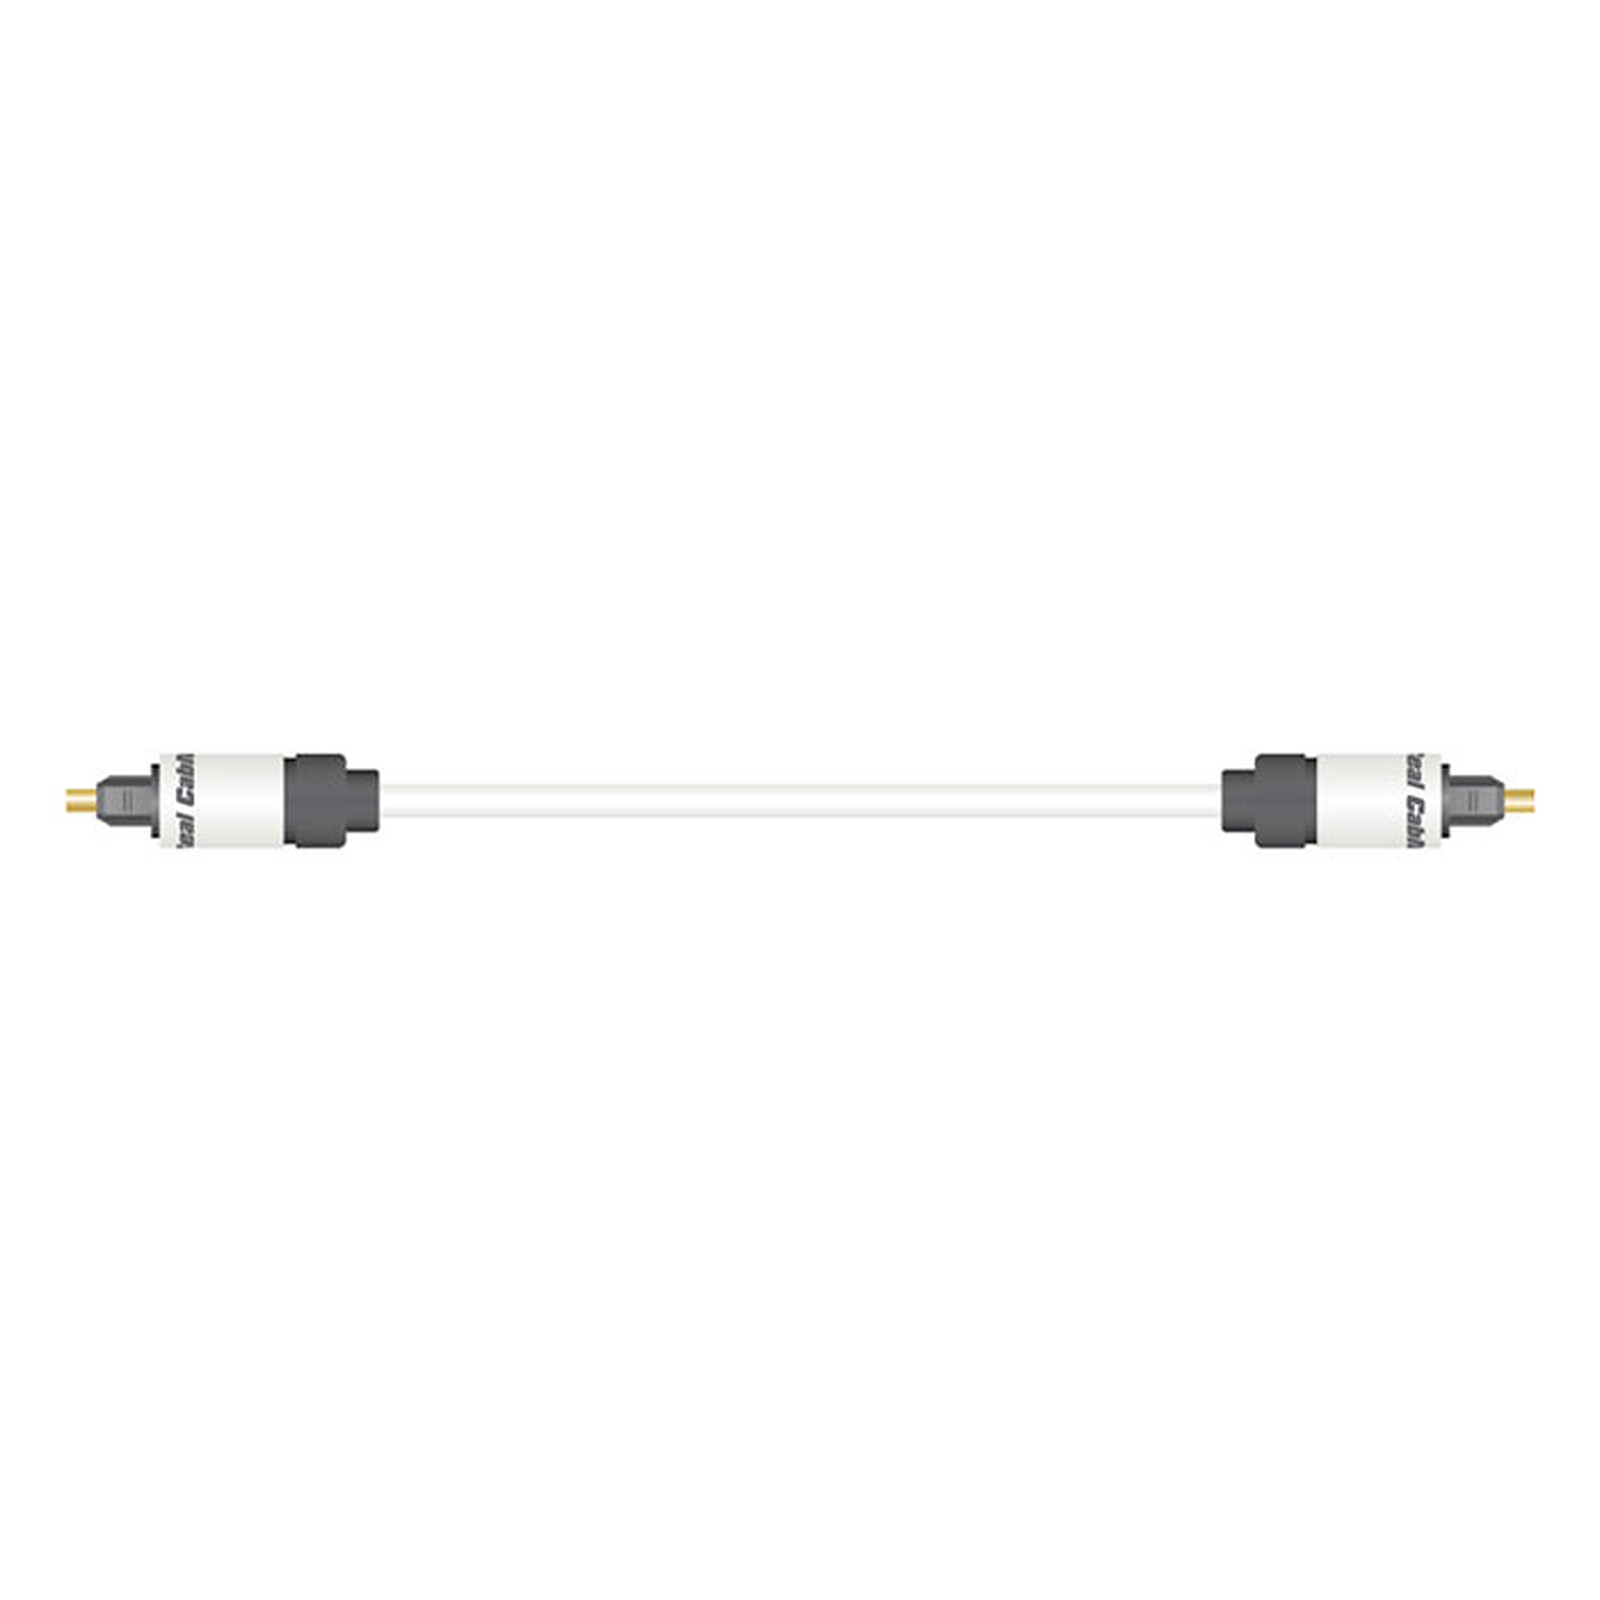 Cable real E-NET 600-2 (5 m) - Cable RJ45 - LDLC